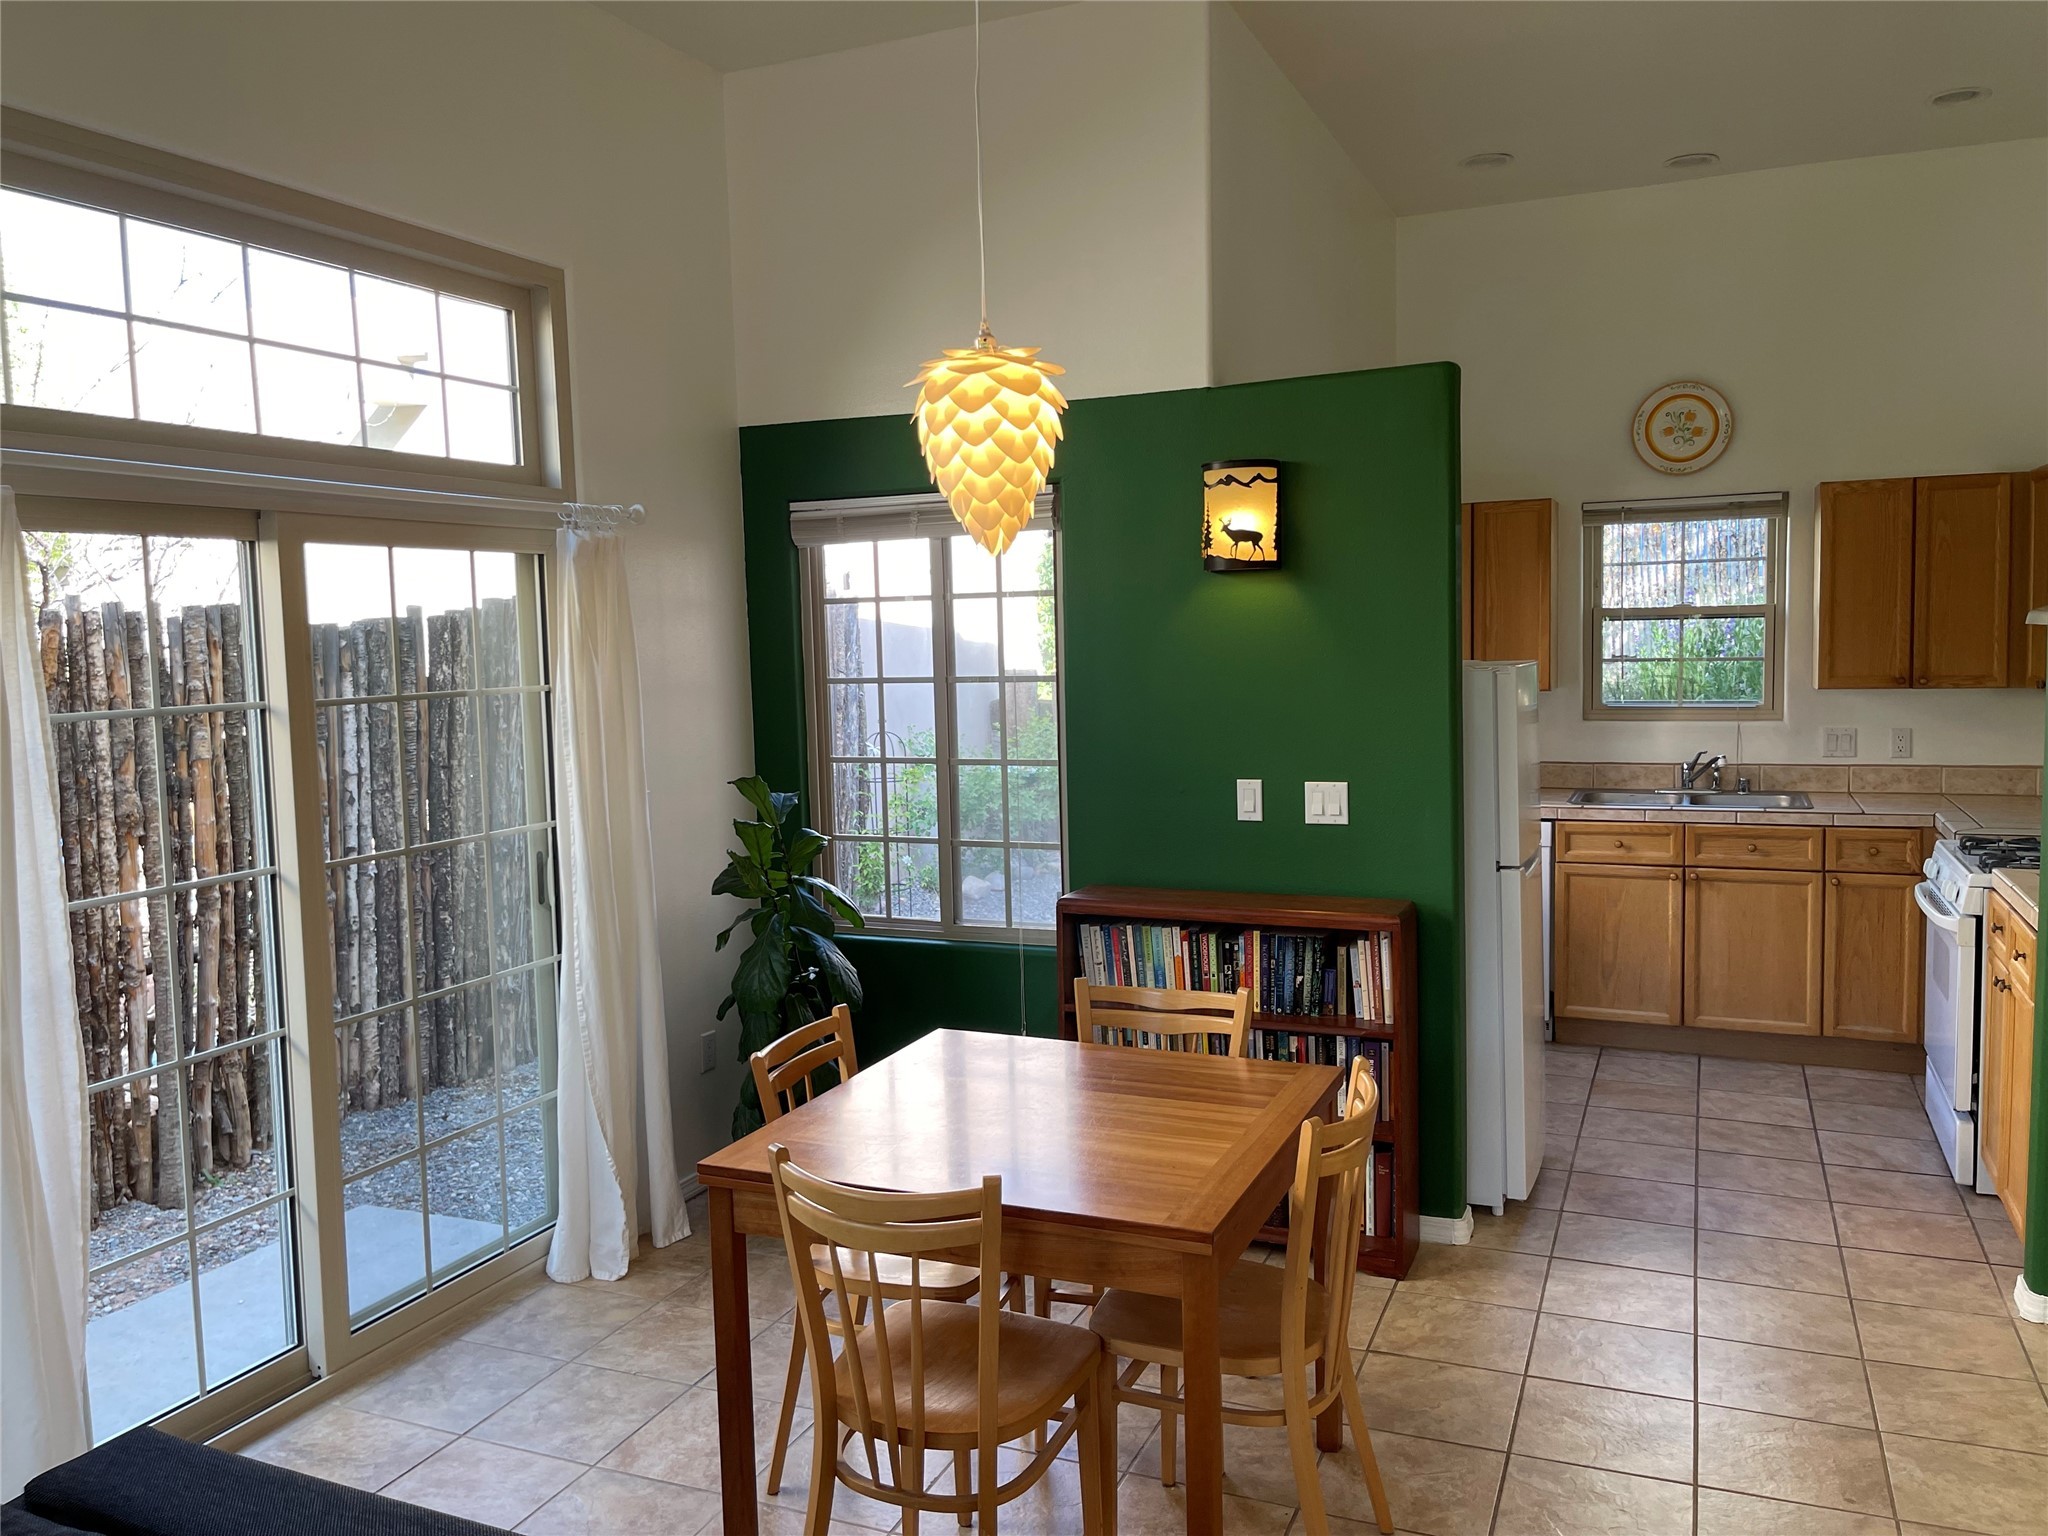 A kitchen close by to the dining area, and also direct access to the backyard garden